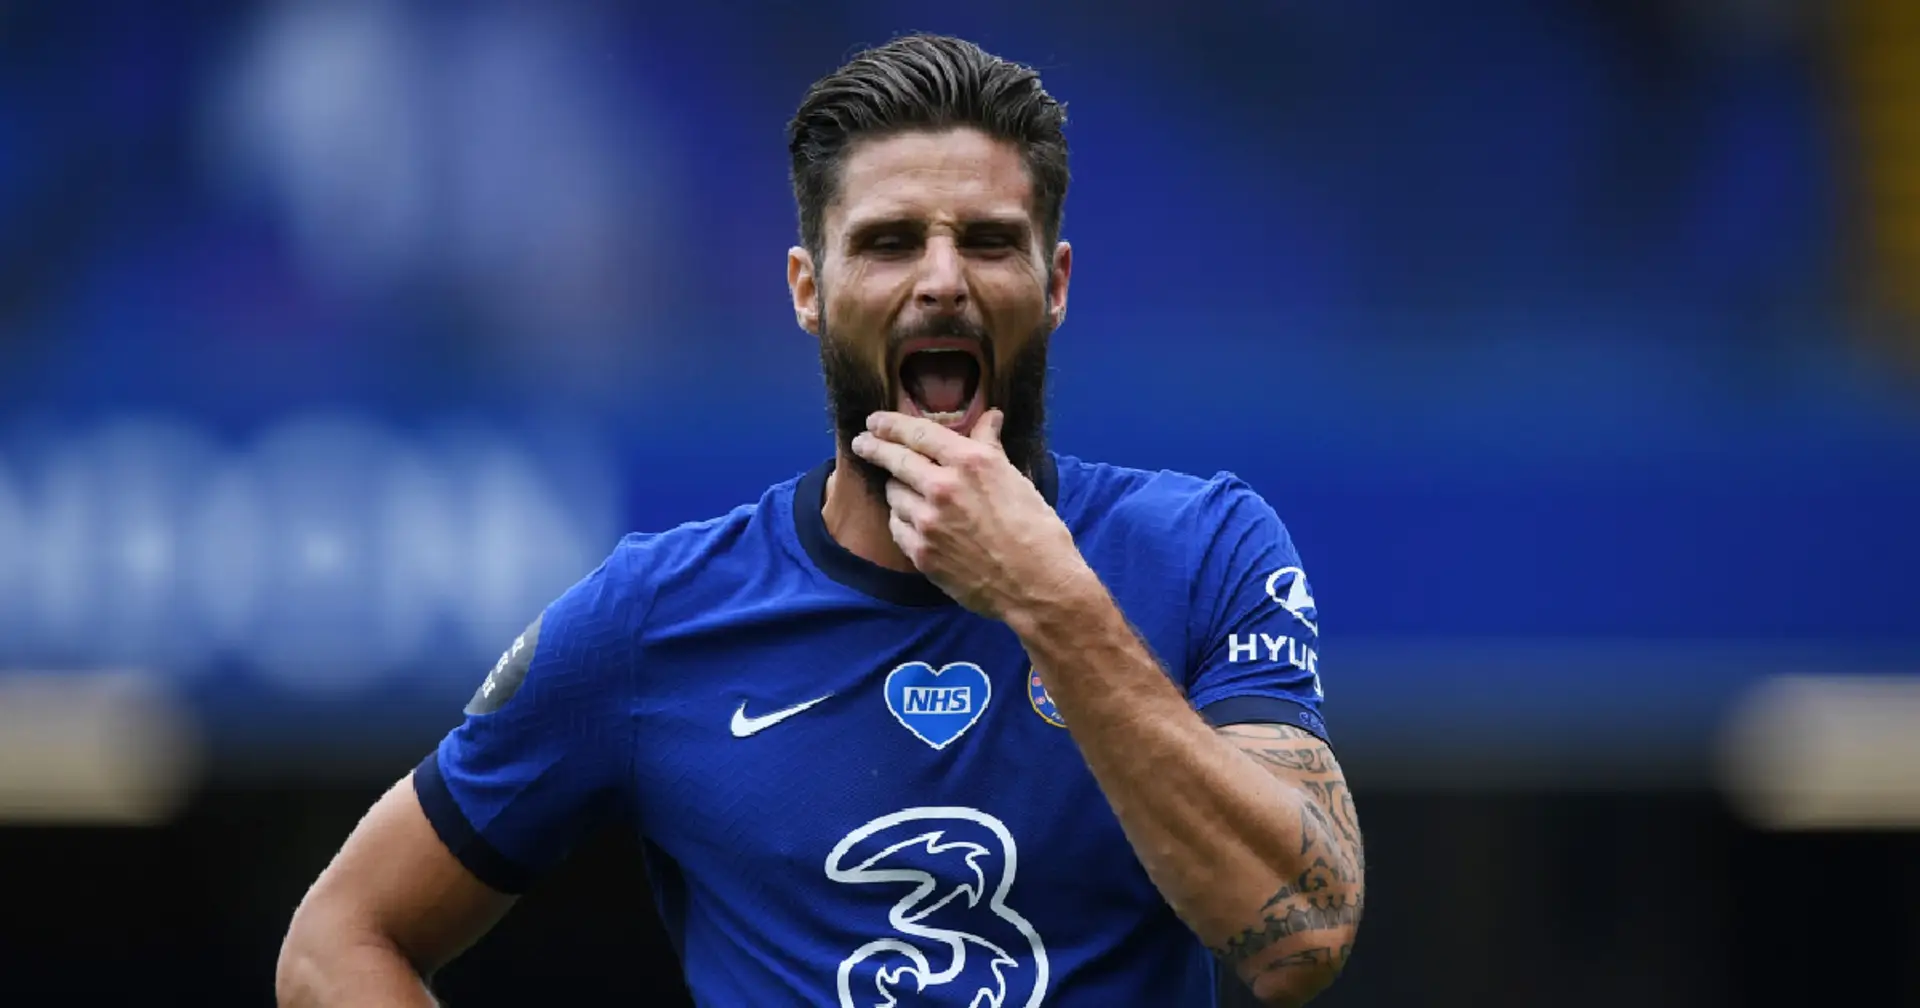 Giroud breaks 19-year-old record with goal against Leeds